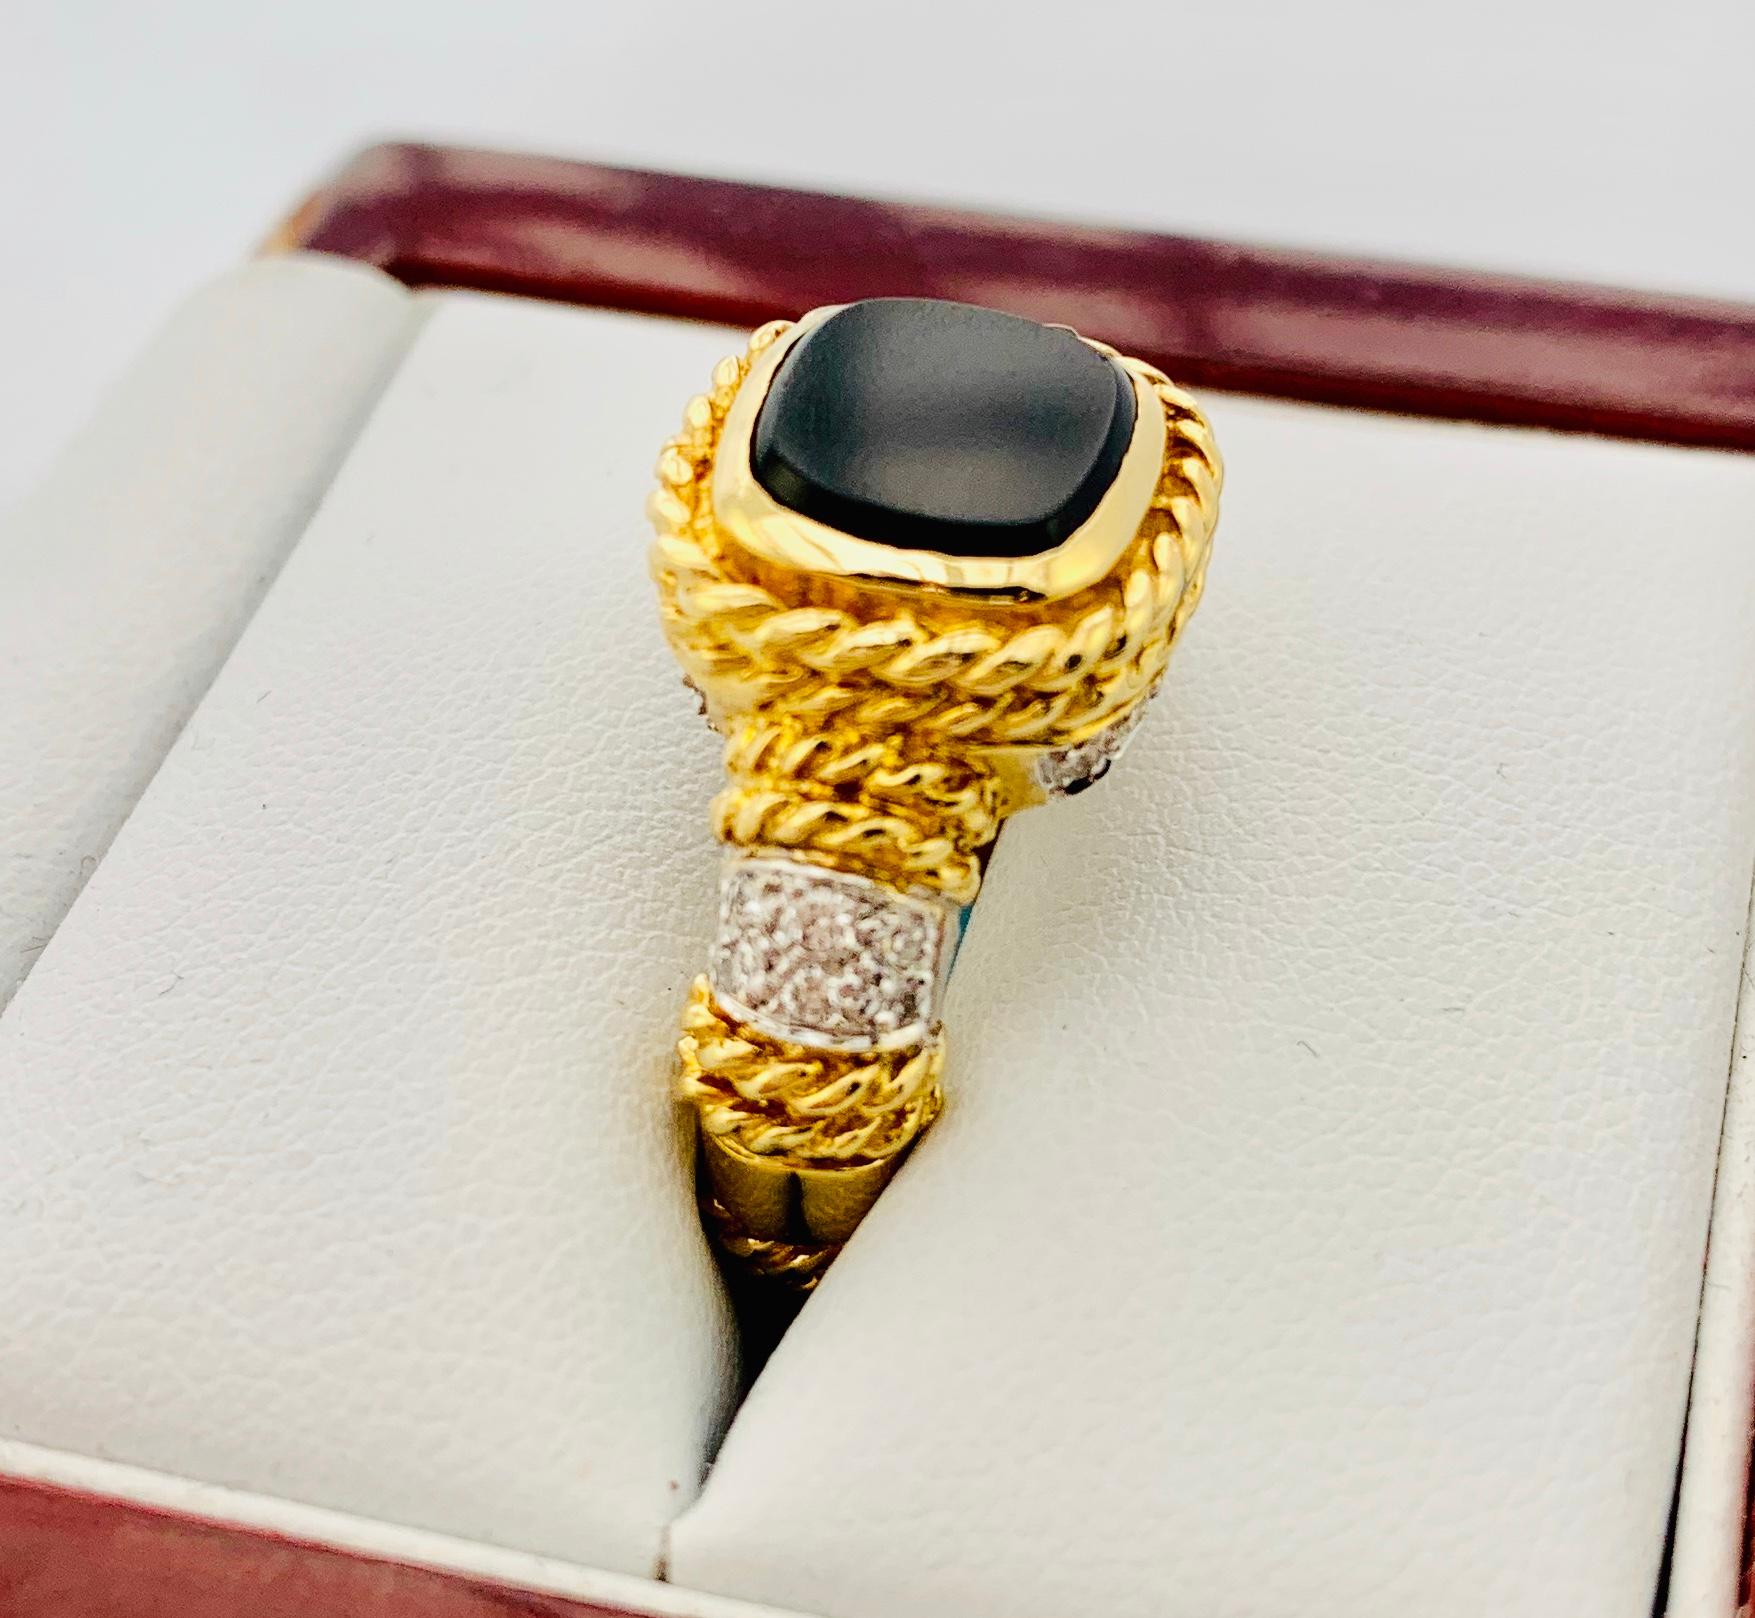 Gorgeous Cassis Designer Ring! This is made in 18K yellow Gold and has a 9 by 9mm center, bezel set black onyx stone and 22 Brilliant diamonds. The estimated carat weight of diamonds is 0.25, they are G-H in color and Vs clarity. Ring Size is 5.75